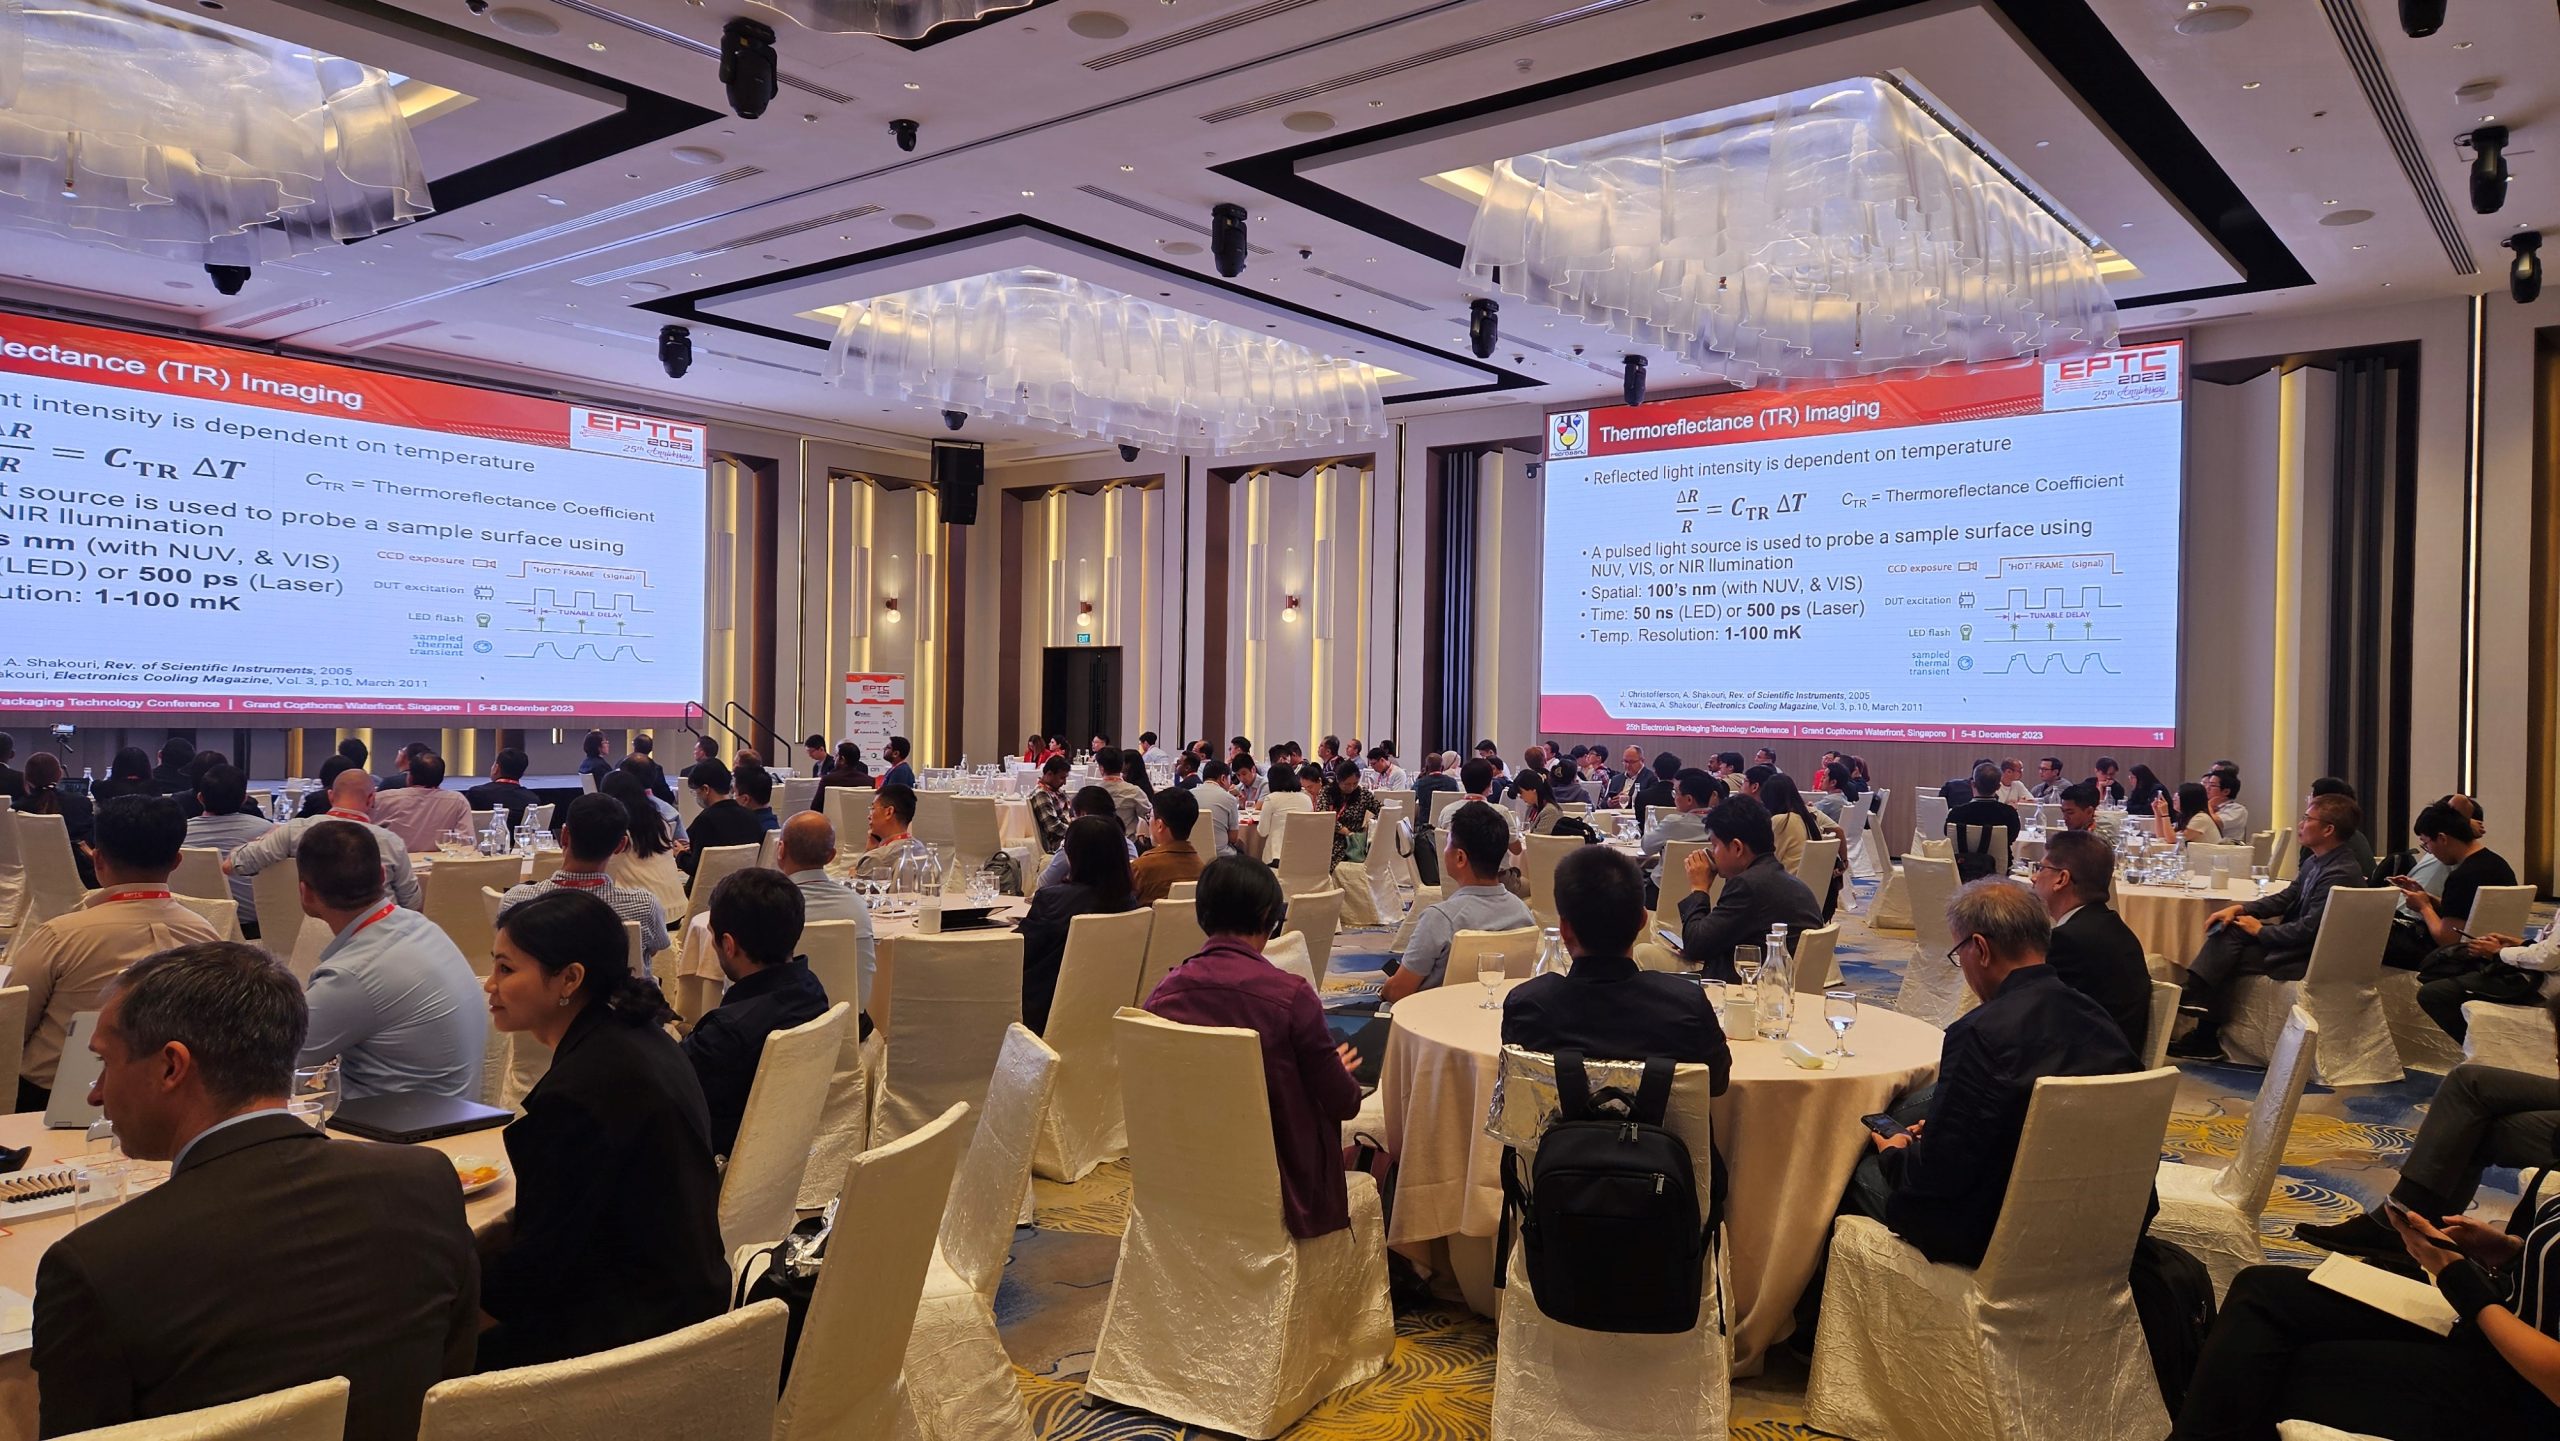 At the venue of the conference's technical talk, keynote speakers are currently sharing their achievements in the field of advanced packaging and discussing the issues and challenges they face.